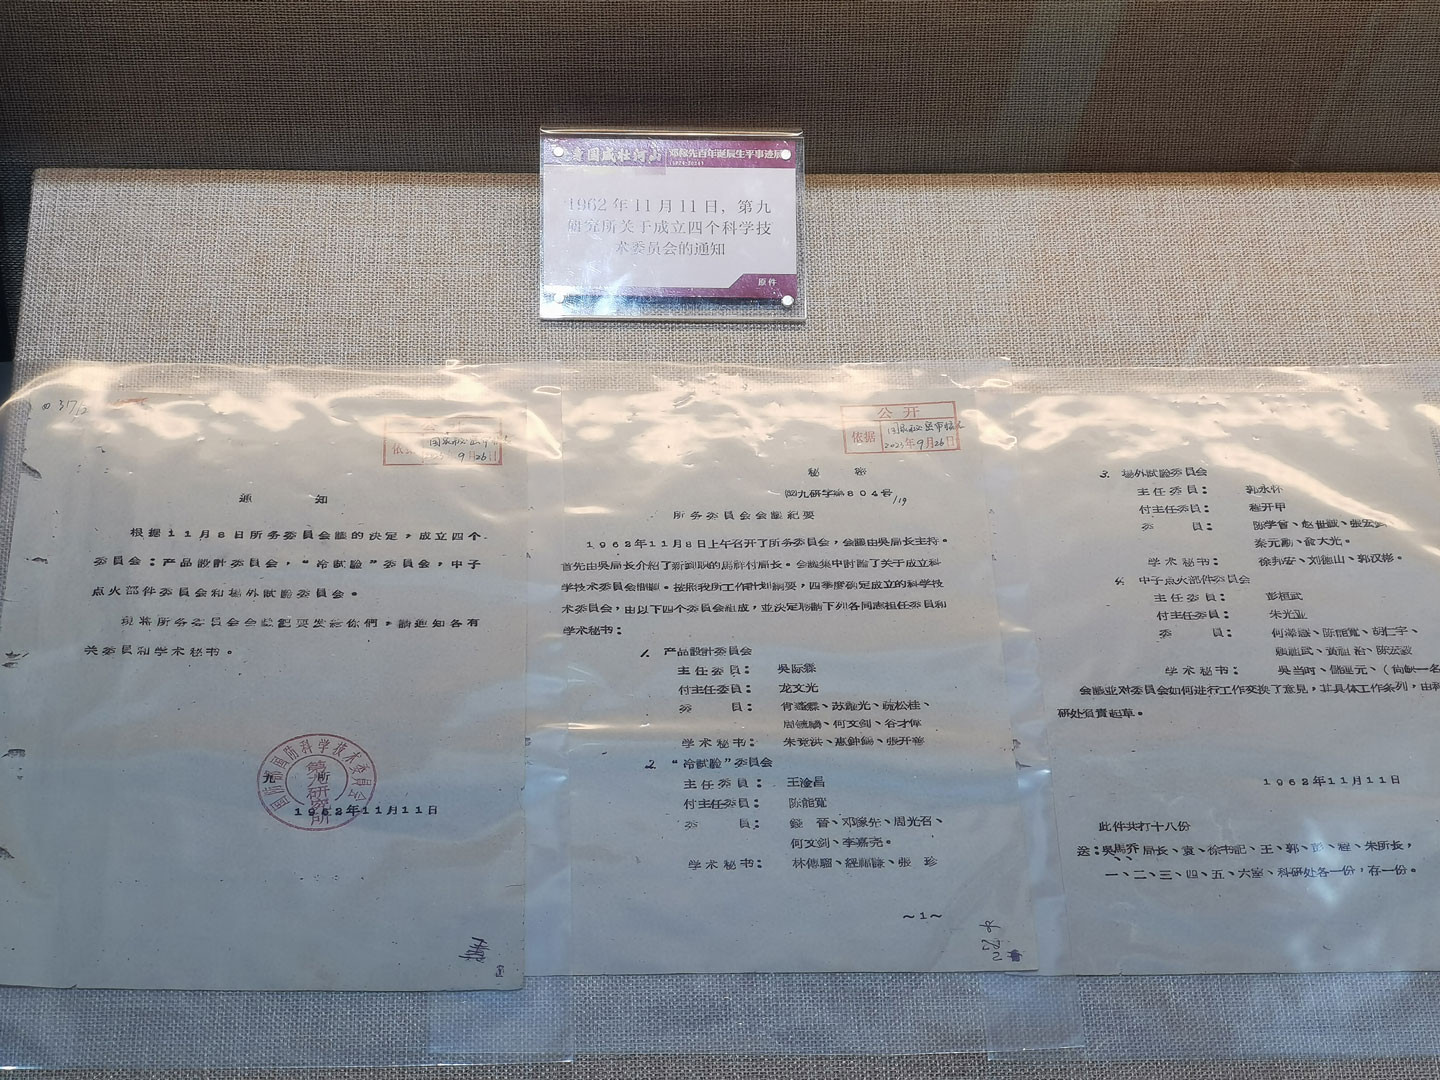 Declassified documents related to China's development of atomic bomb are displayed in the National Museum for Modern Chinese Scientists, Beijing, May 30, 2024. /CGTN